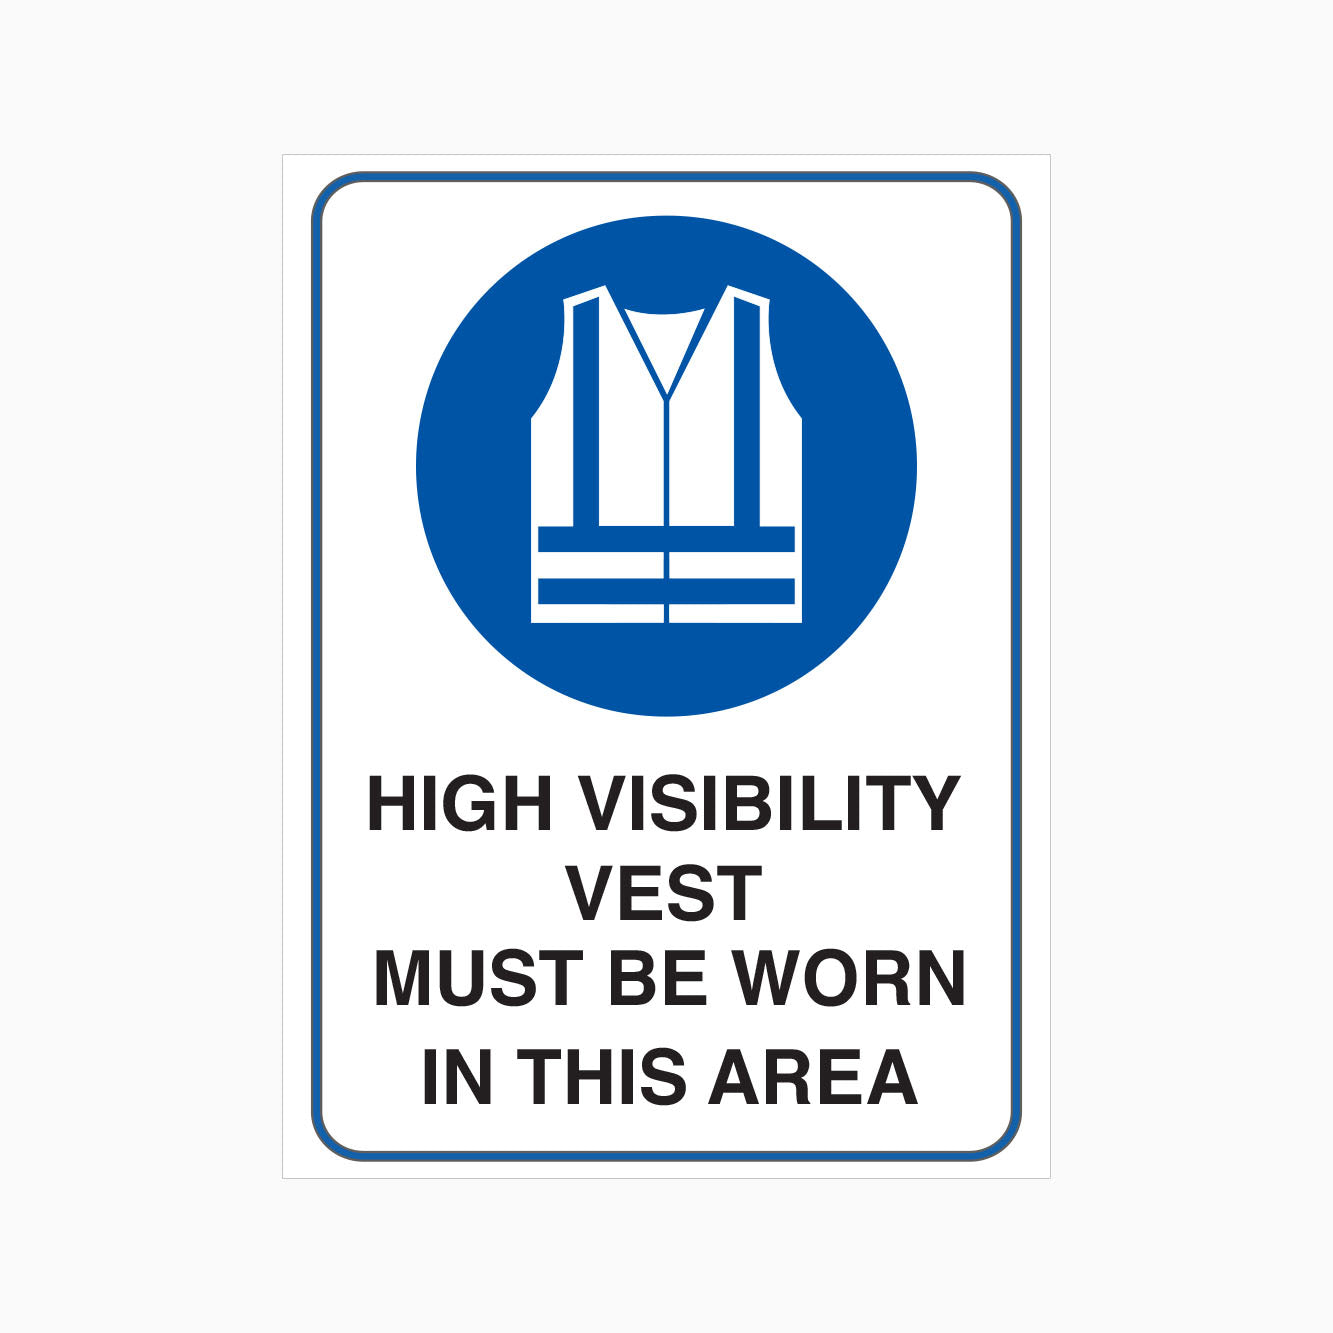 HIGH VISIBILITY VEST MUST BE WORN SIGN - GET SIGNS